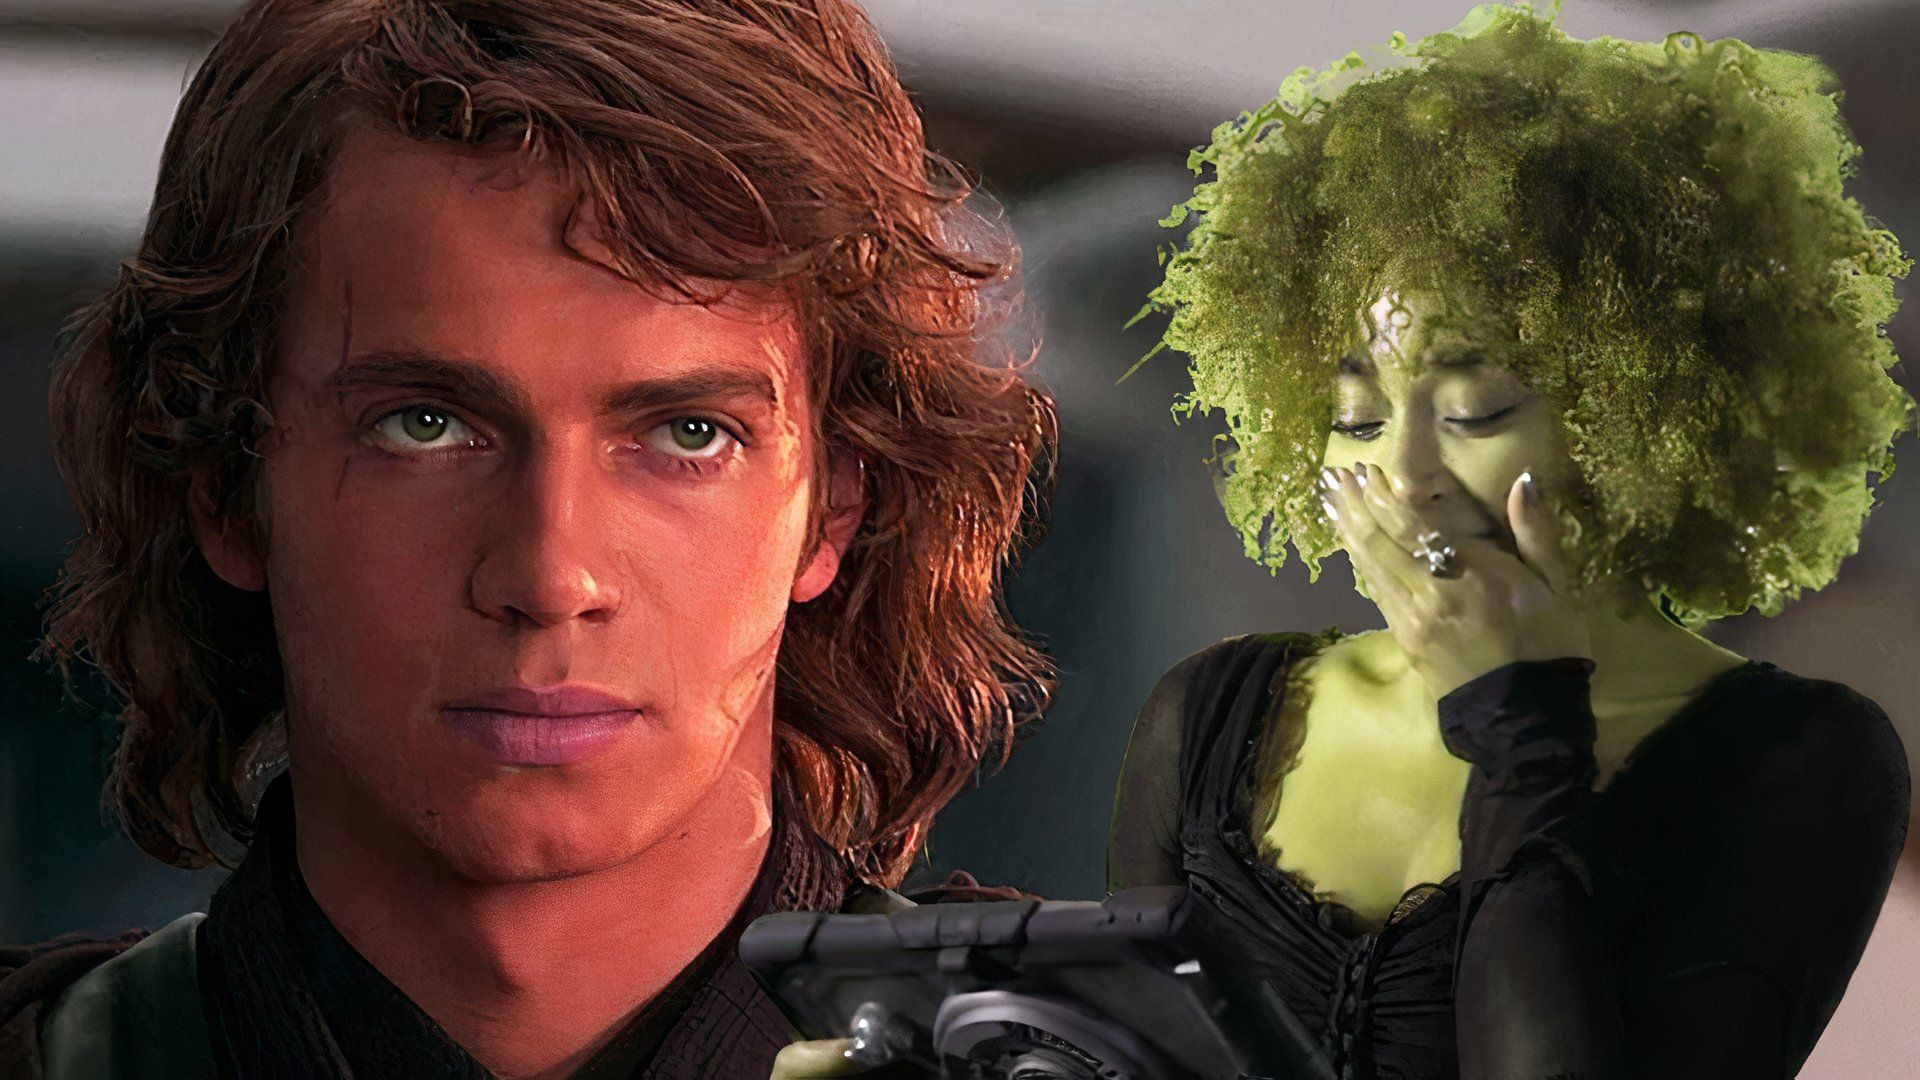 Hayden Christensen in Star Wars: Episode III - Revenge of the Sith paired with an image of Amandla Stenberg.